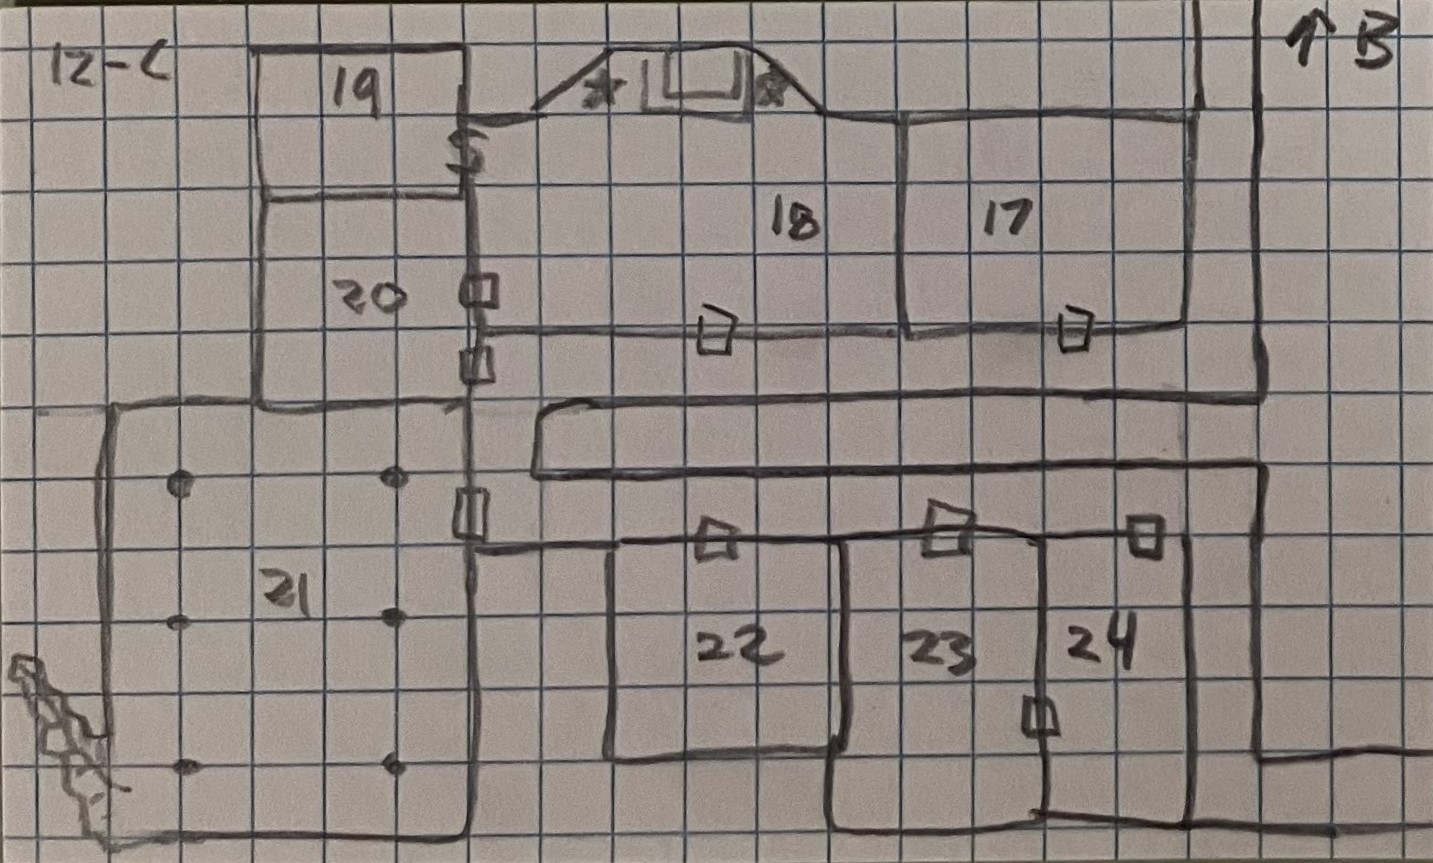 Map of Dungeon Level 12-C